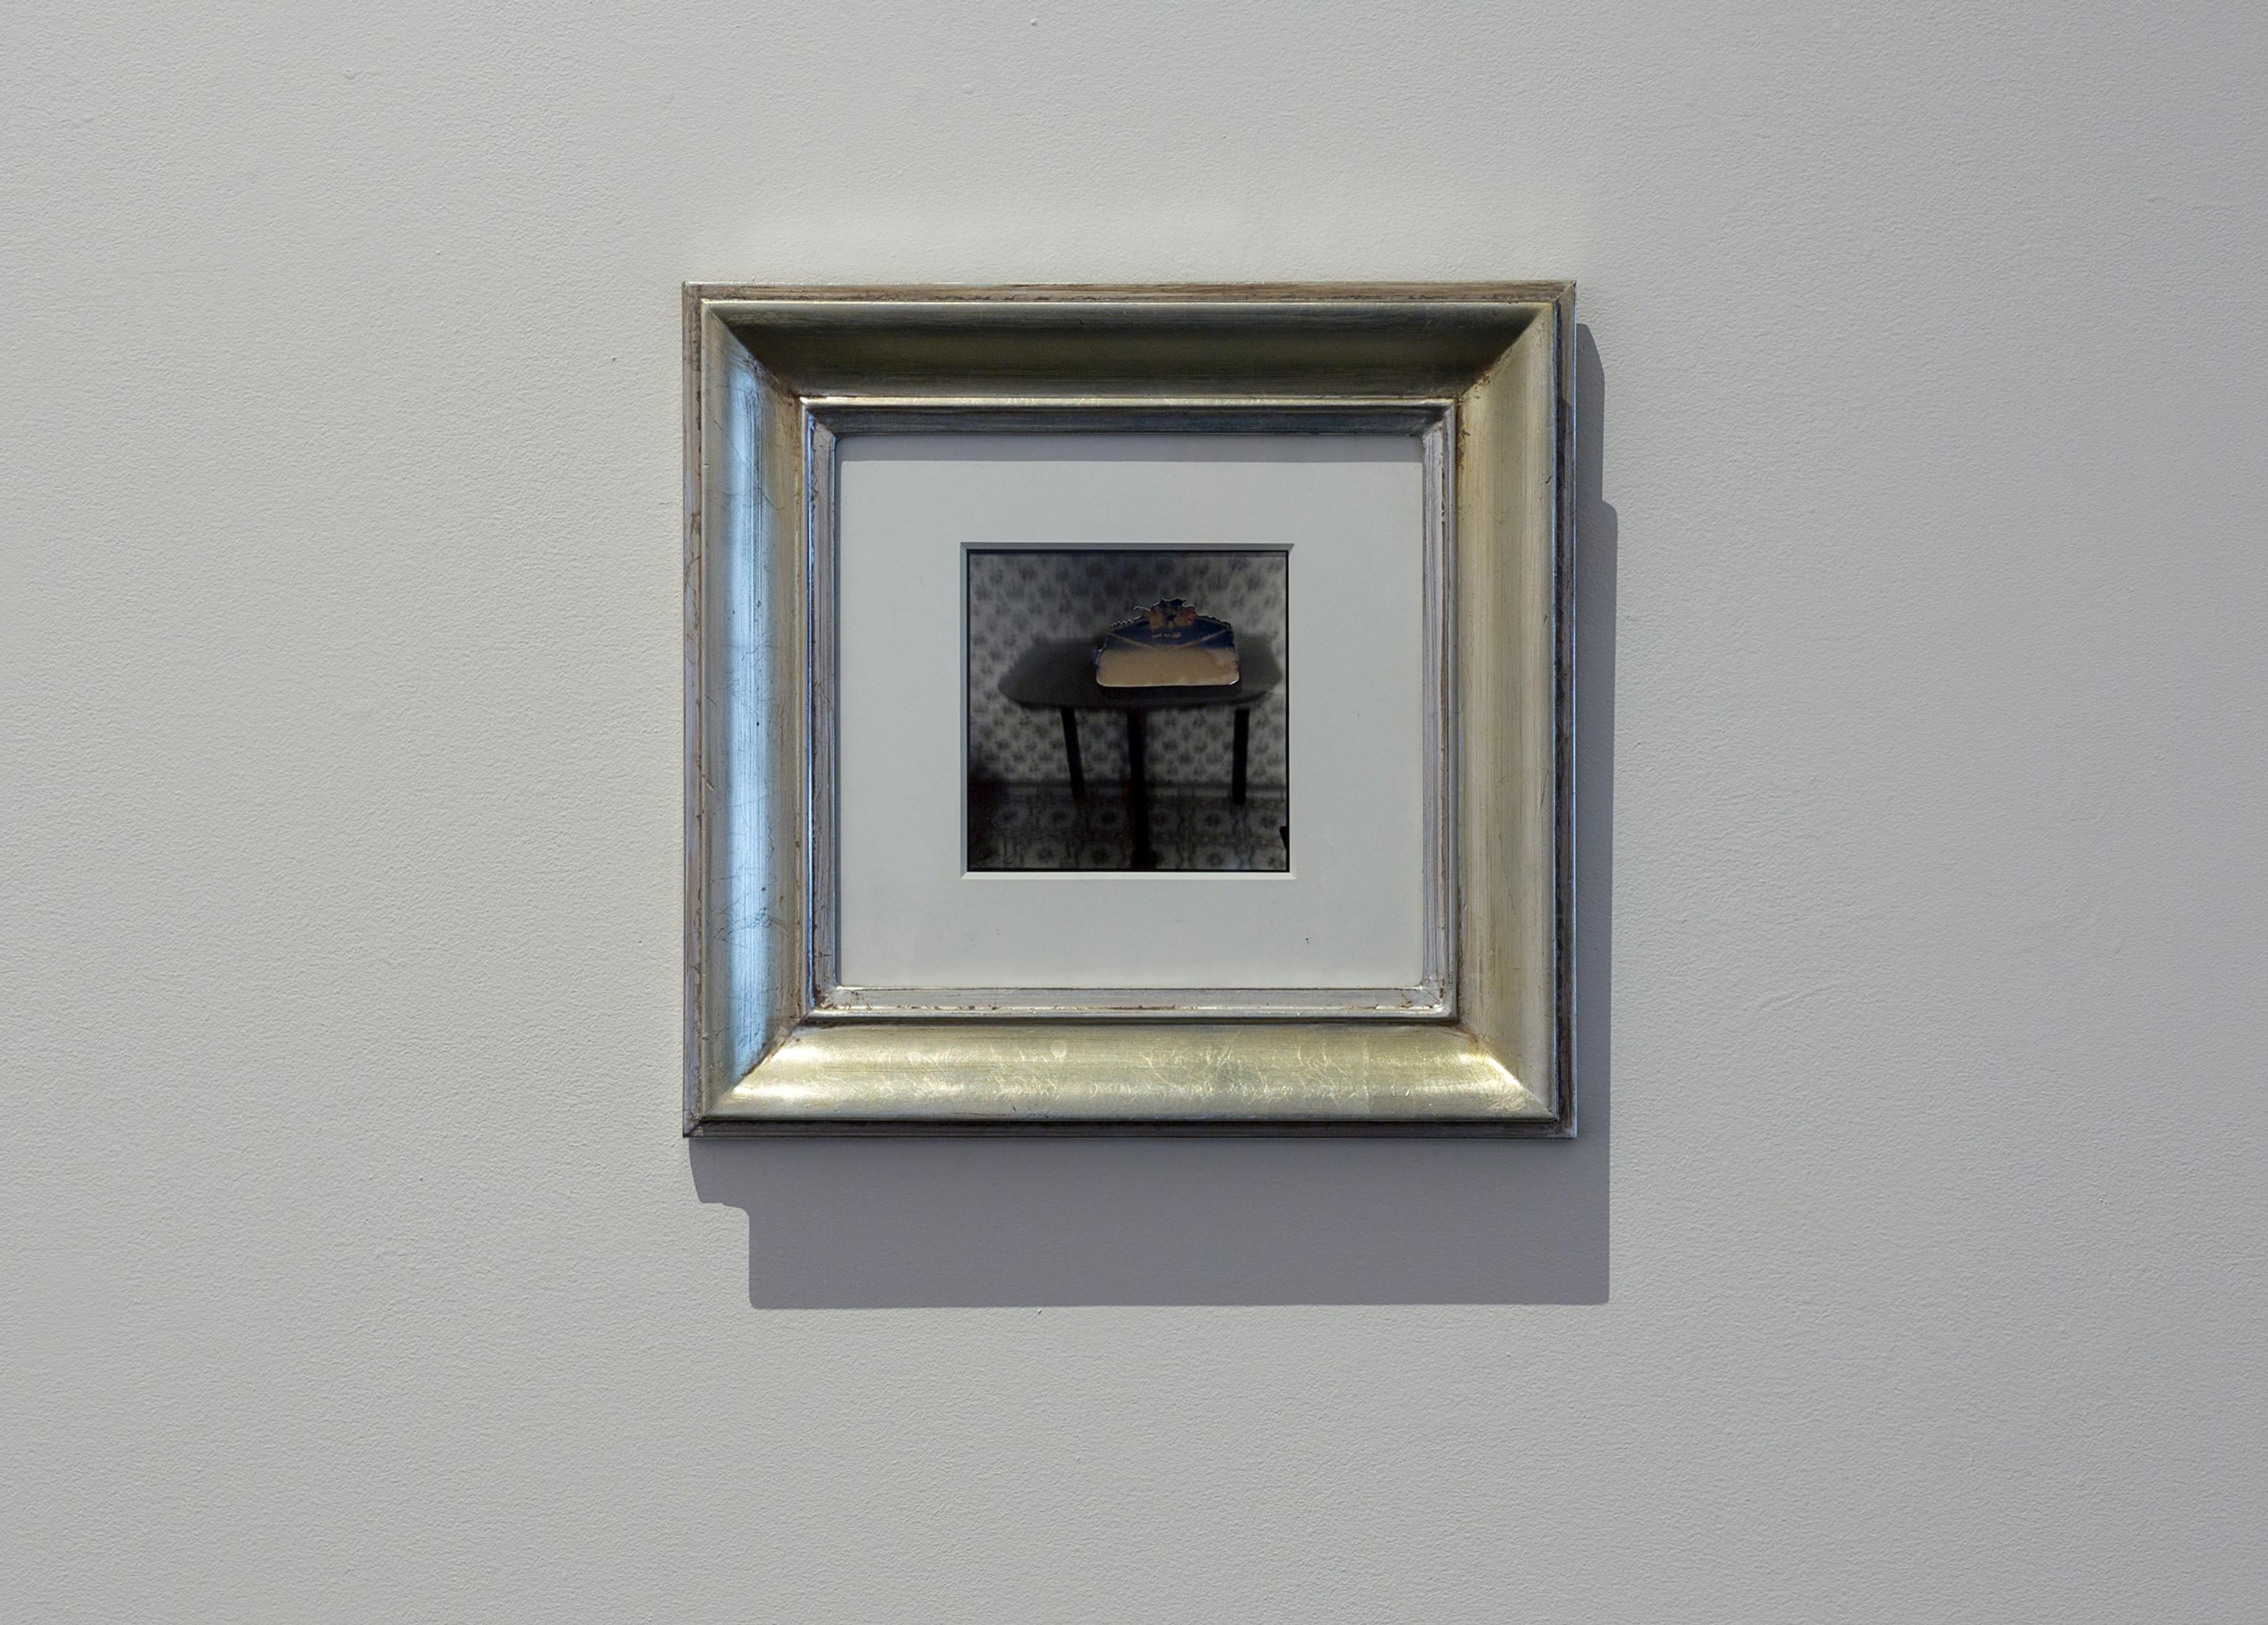 Minerva Betts, Table circa 1980, silver bromide print, framed, 350 x 365mm. Courtesy of the Estate of L. Budd and Michael Lett, Auckland. In Fragments of a World, curated by Sandy Callister, Adam Art Gallery Te Pātaka Toi, Victoria University of Wellington (photo: Shaun Waugh)